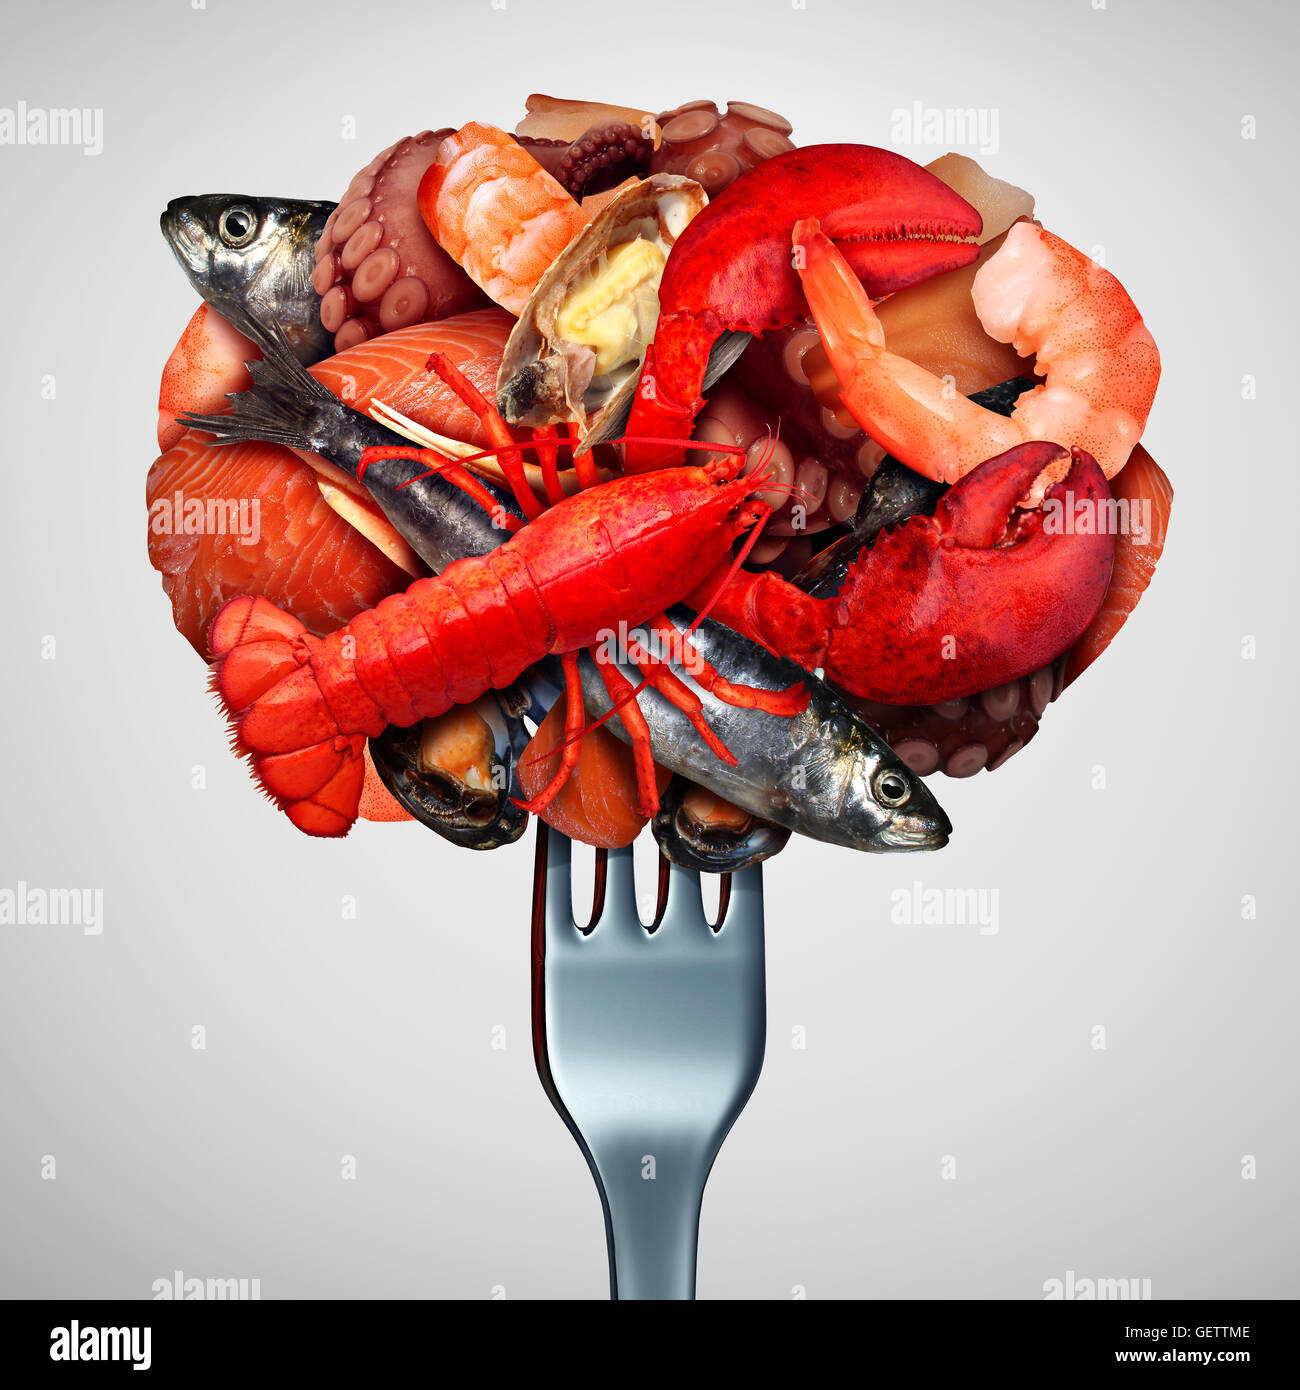 Seafood concept as a group of shellfish crustacean and fish  grouped together on a fork as a fresh meal from the ocean as lobster steamed clams mussels shrimp octopus and sardines as a sea gourmet dinner icon with 3D illustration Elements. Stock Photo